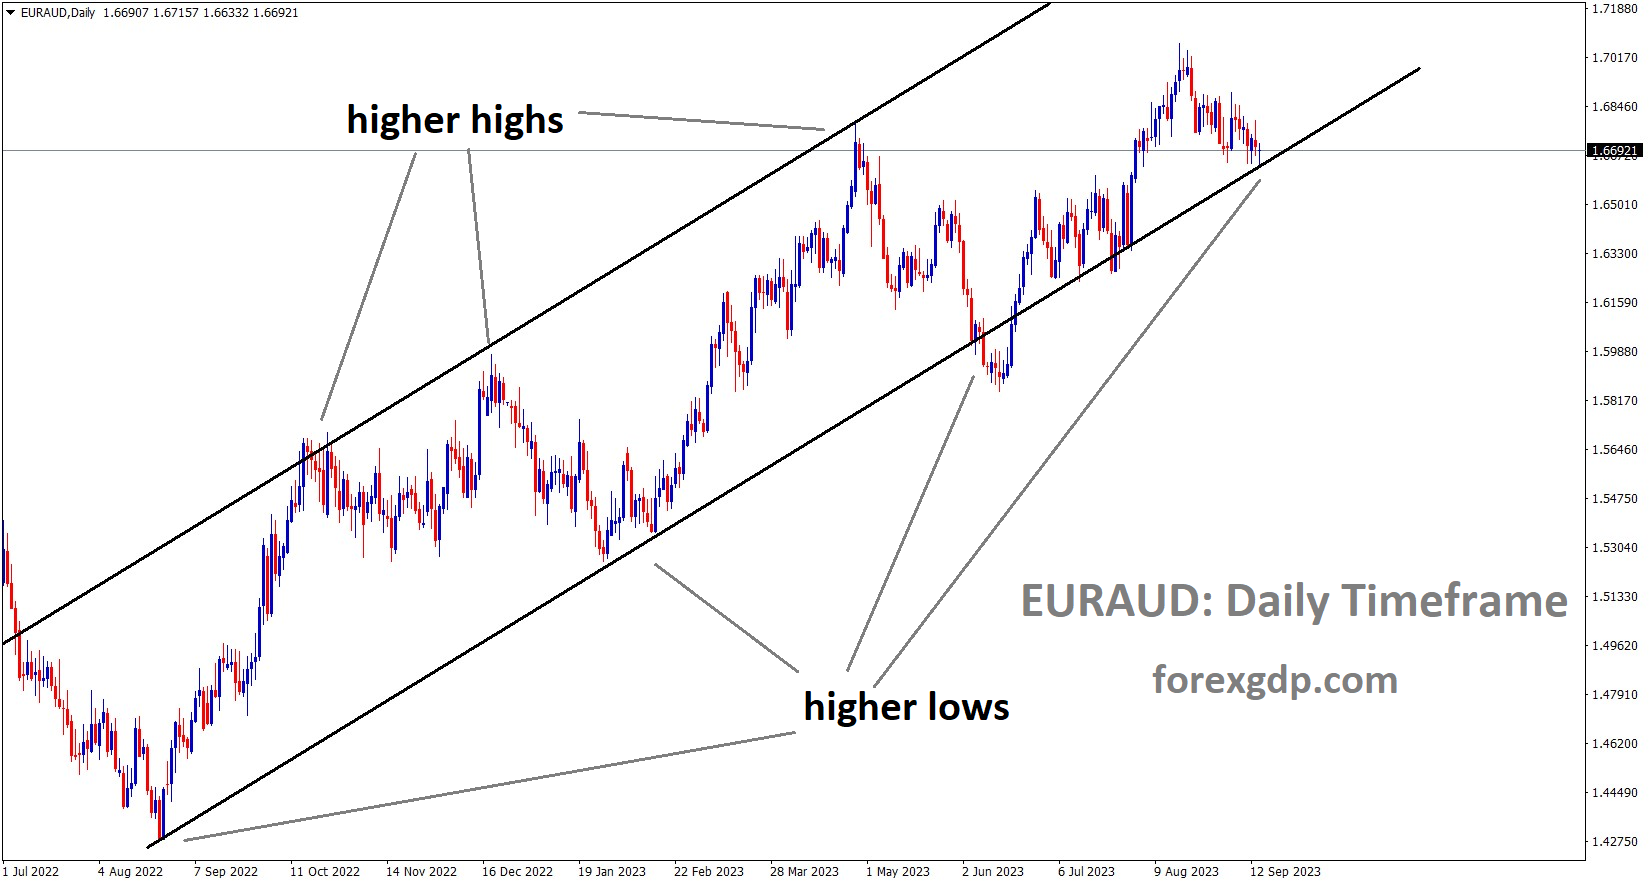 EURAUD Daily TF Analysis Market is moving in an Ascending channel and the market has reached the higher low area of the channel